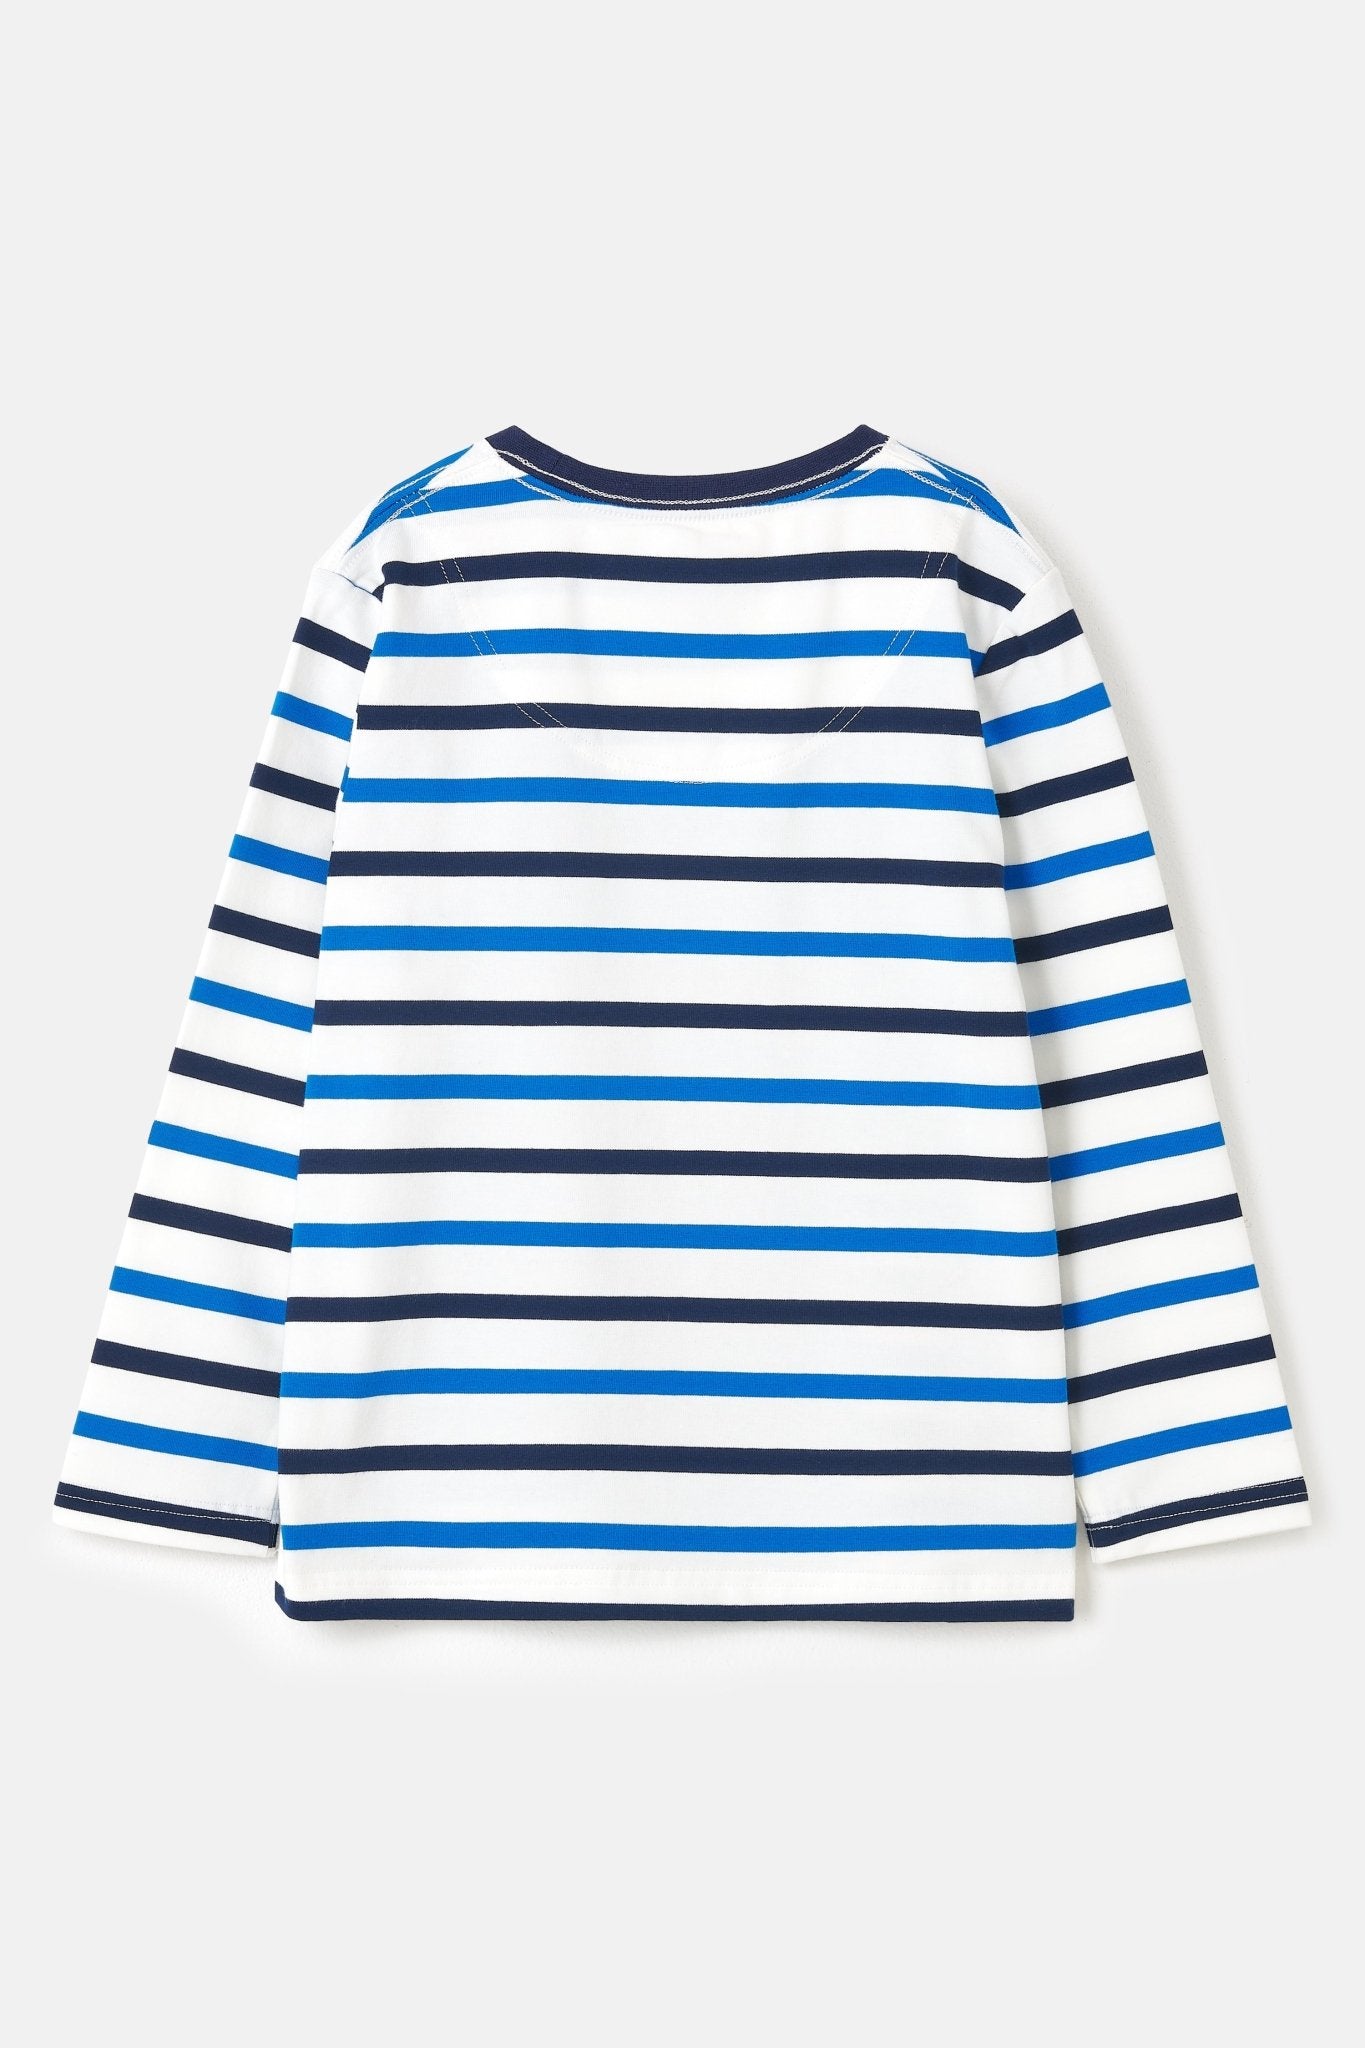 Oliver Boys' Long Sleeve Top, Fire Engine Print